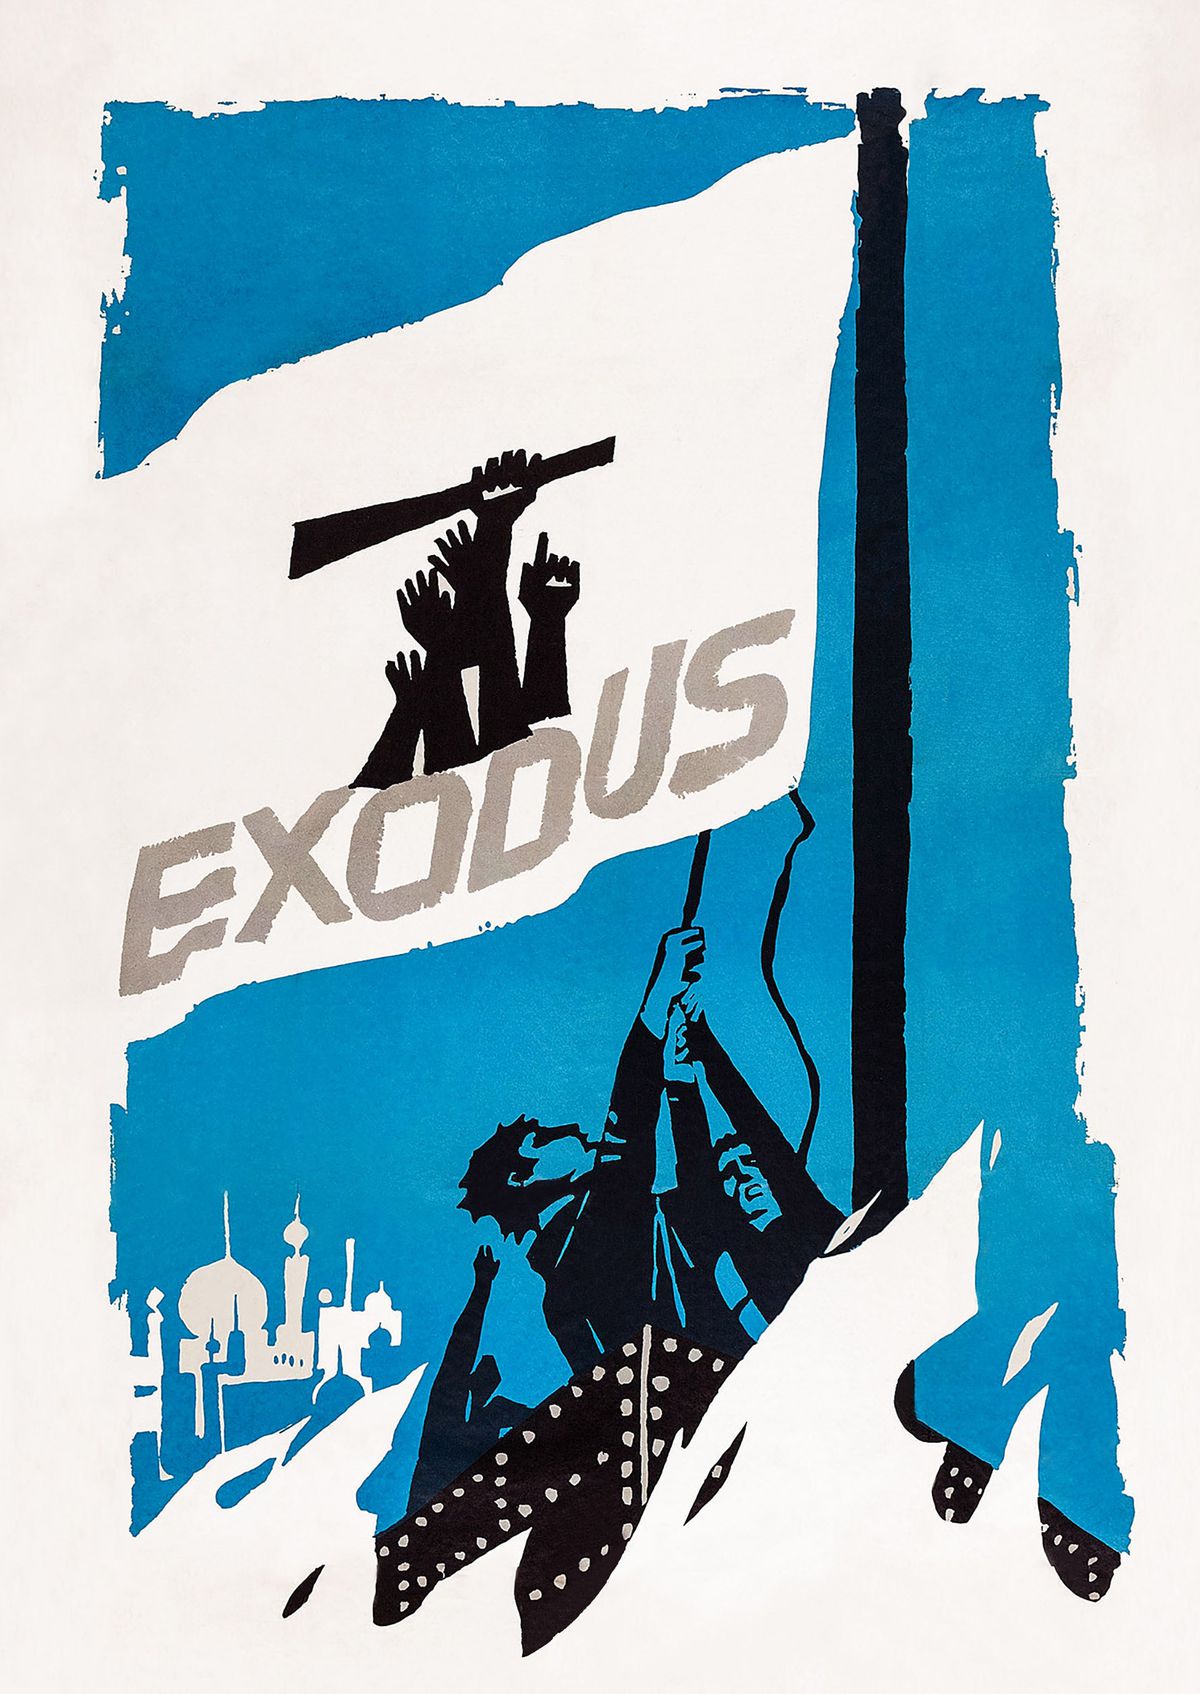 A papercut-style illustration of figures hoisting a flag with the film’s title on it, with flames in the foreground. 